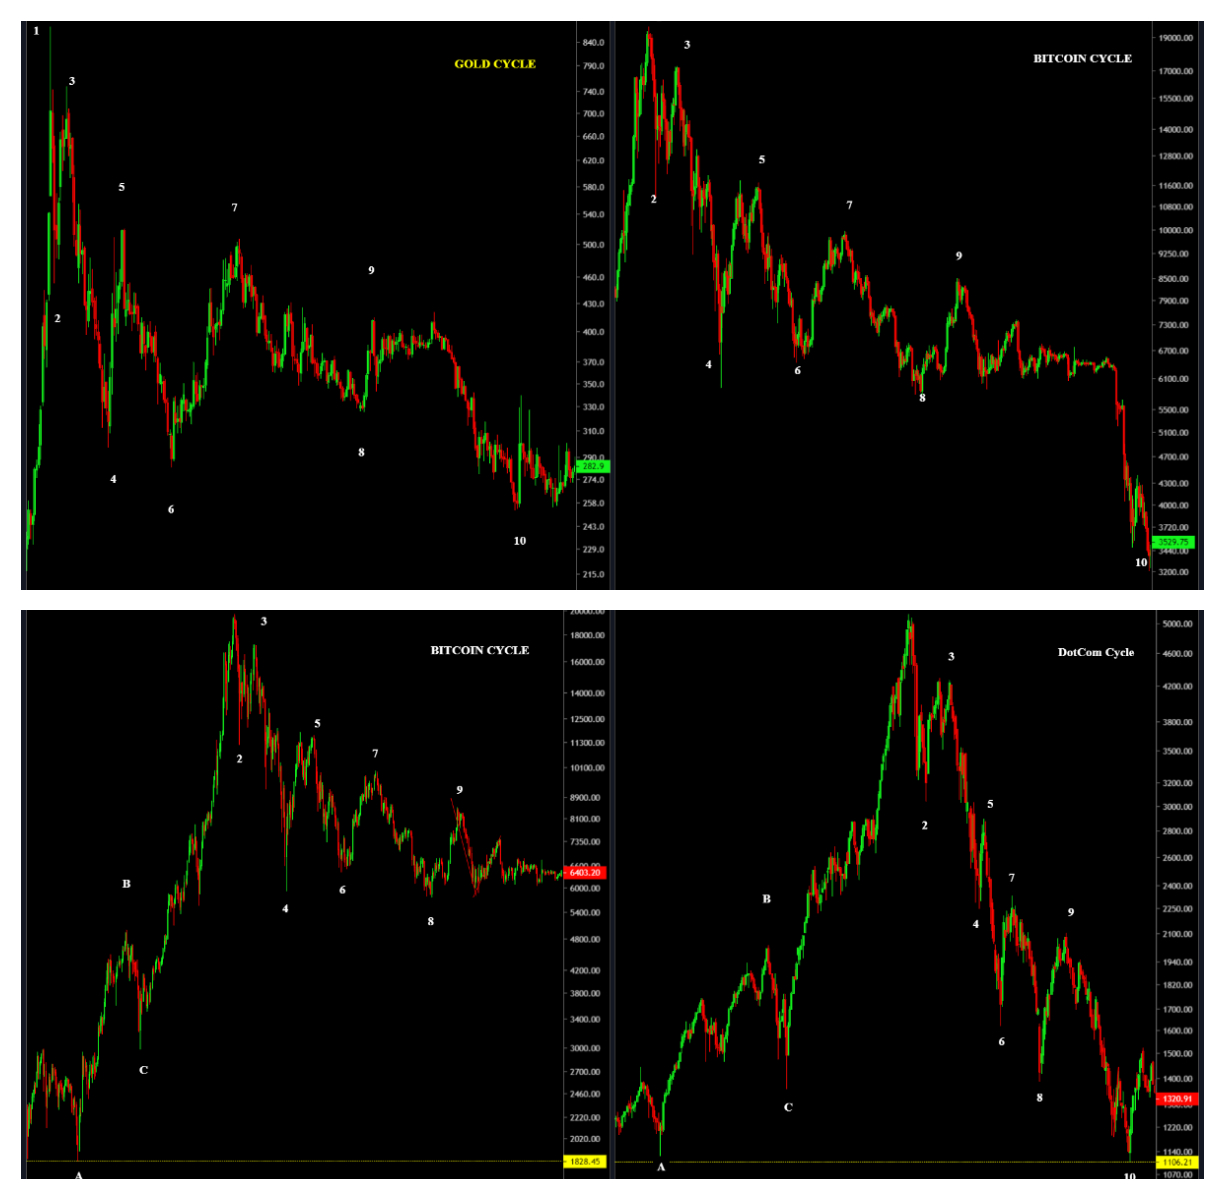 Repeating Cycles of Bitcoin, Gold & DotCom.